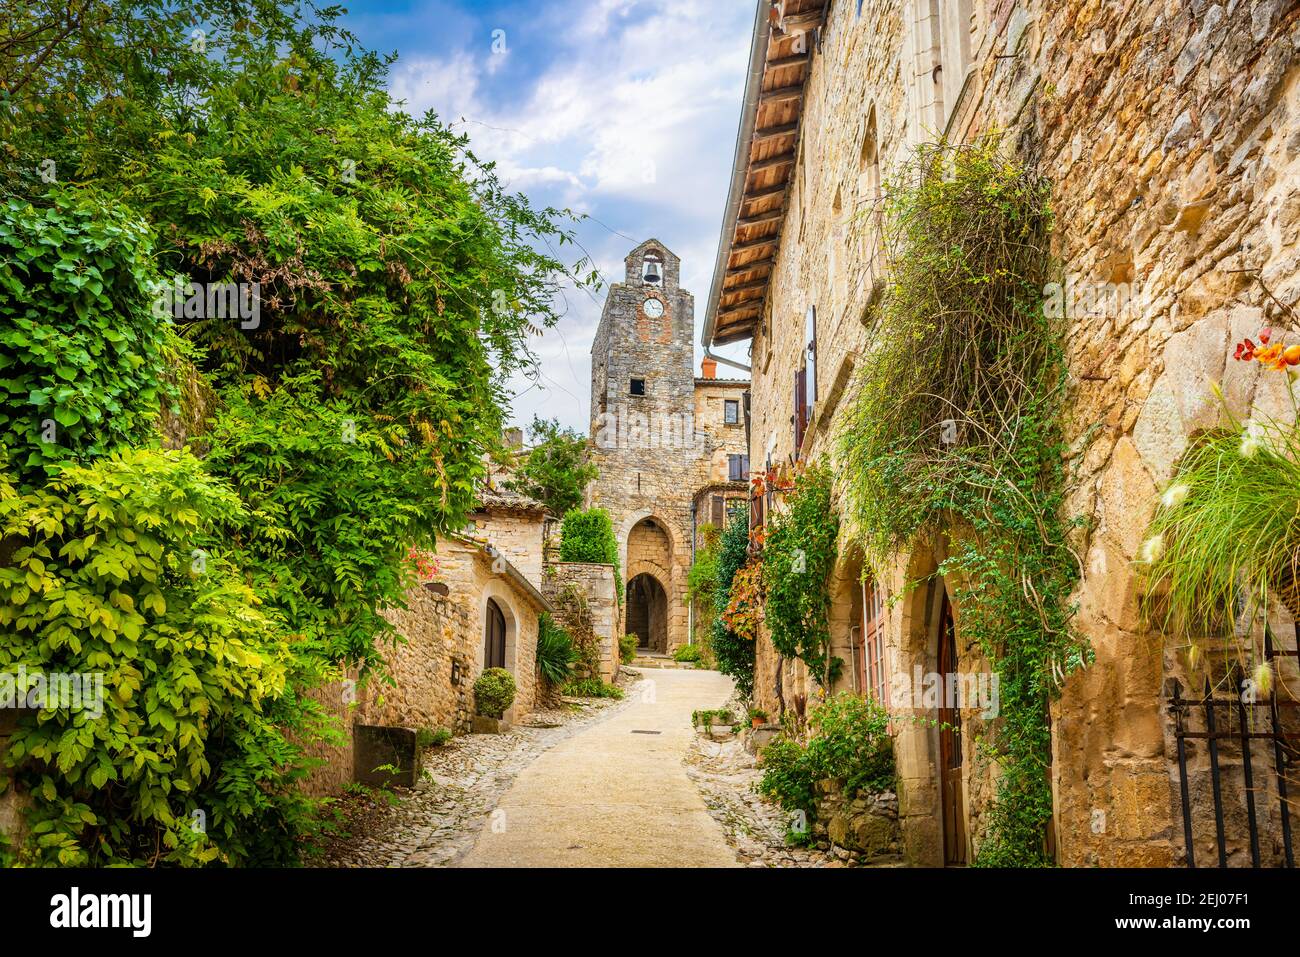 Beautiful medieval village of Bruniquel on the river Aveyron in Occitania, France Stock Photo